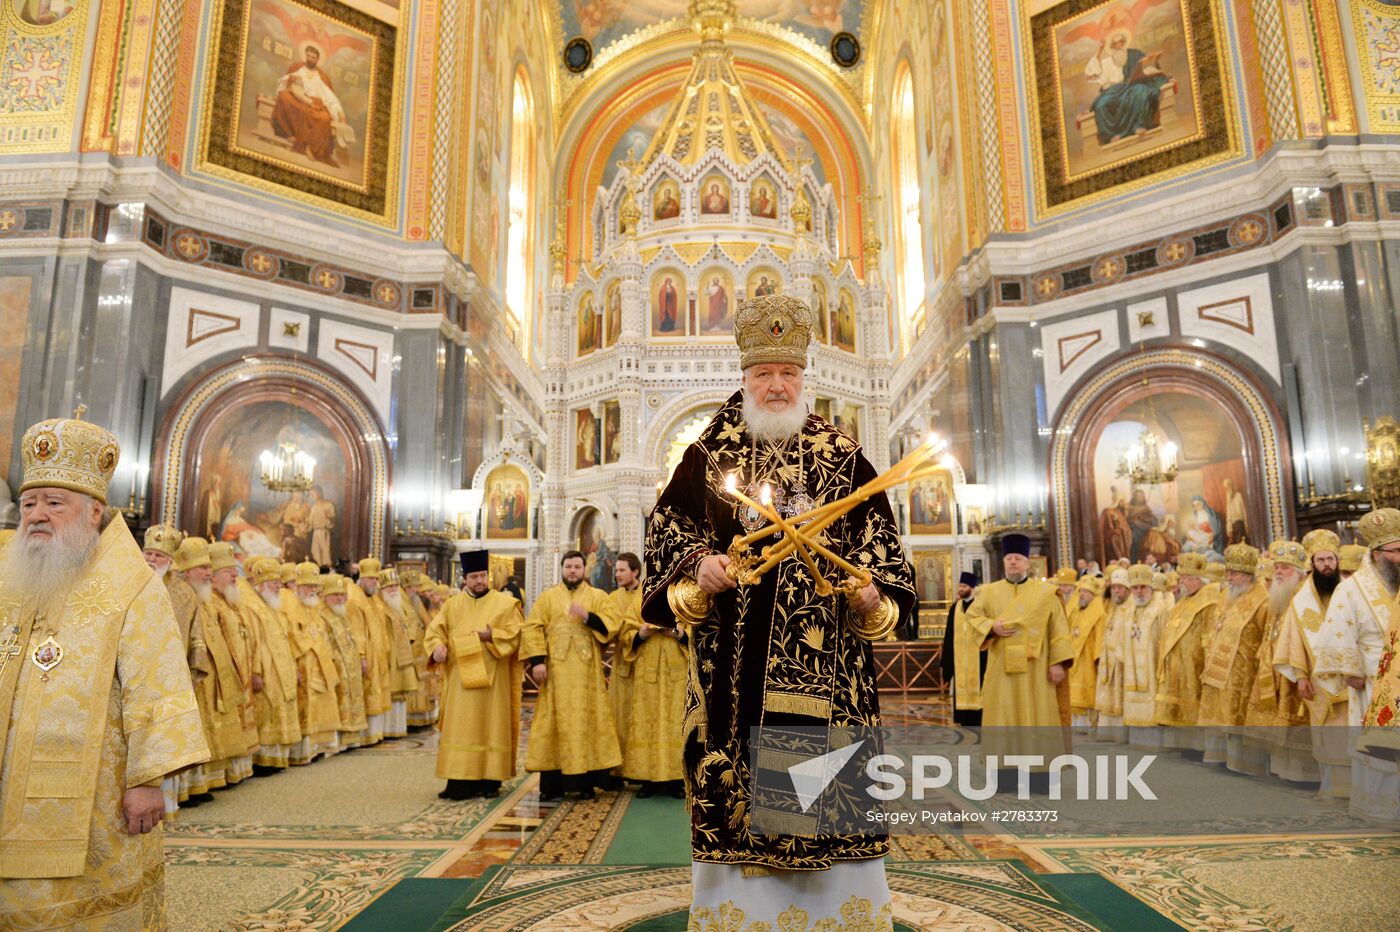 Patriarch Kirill conducts liturgy on his enthronement day